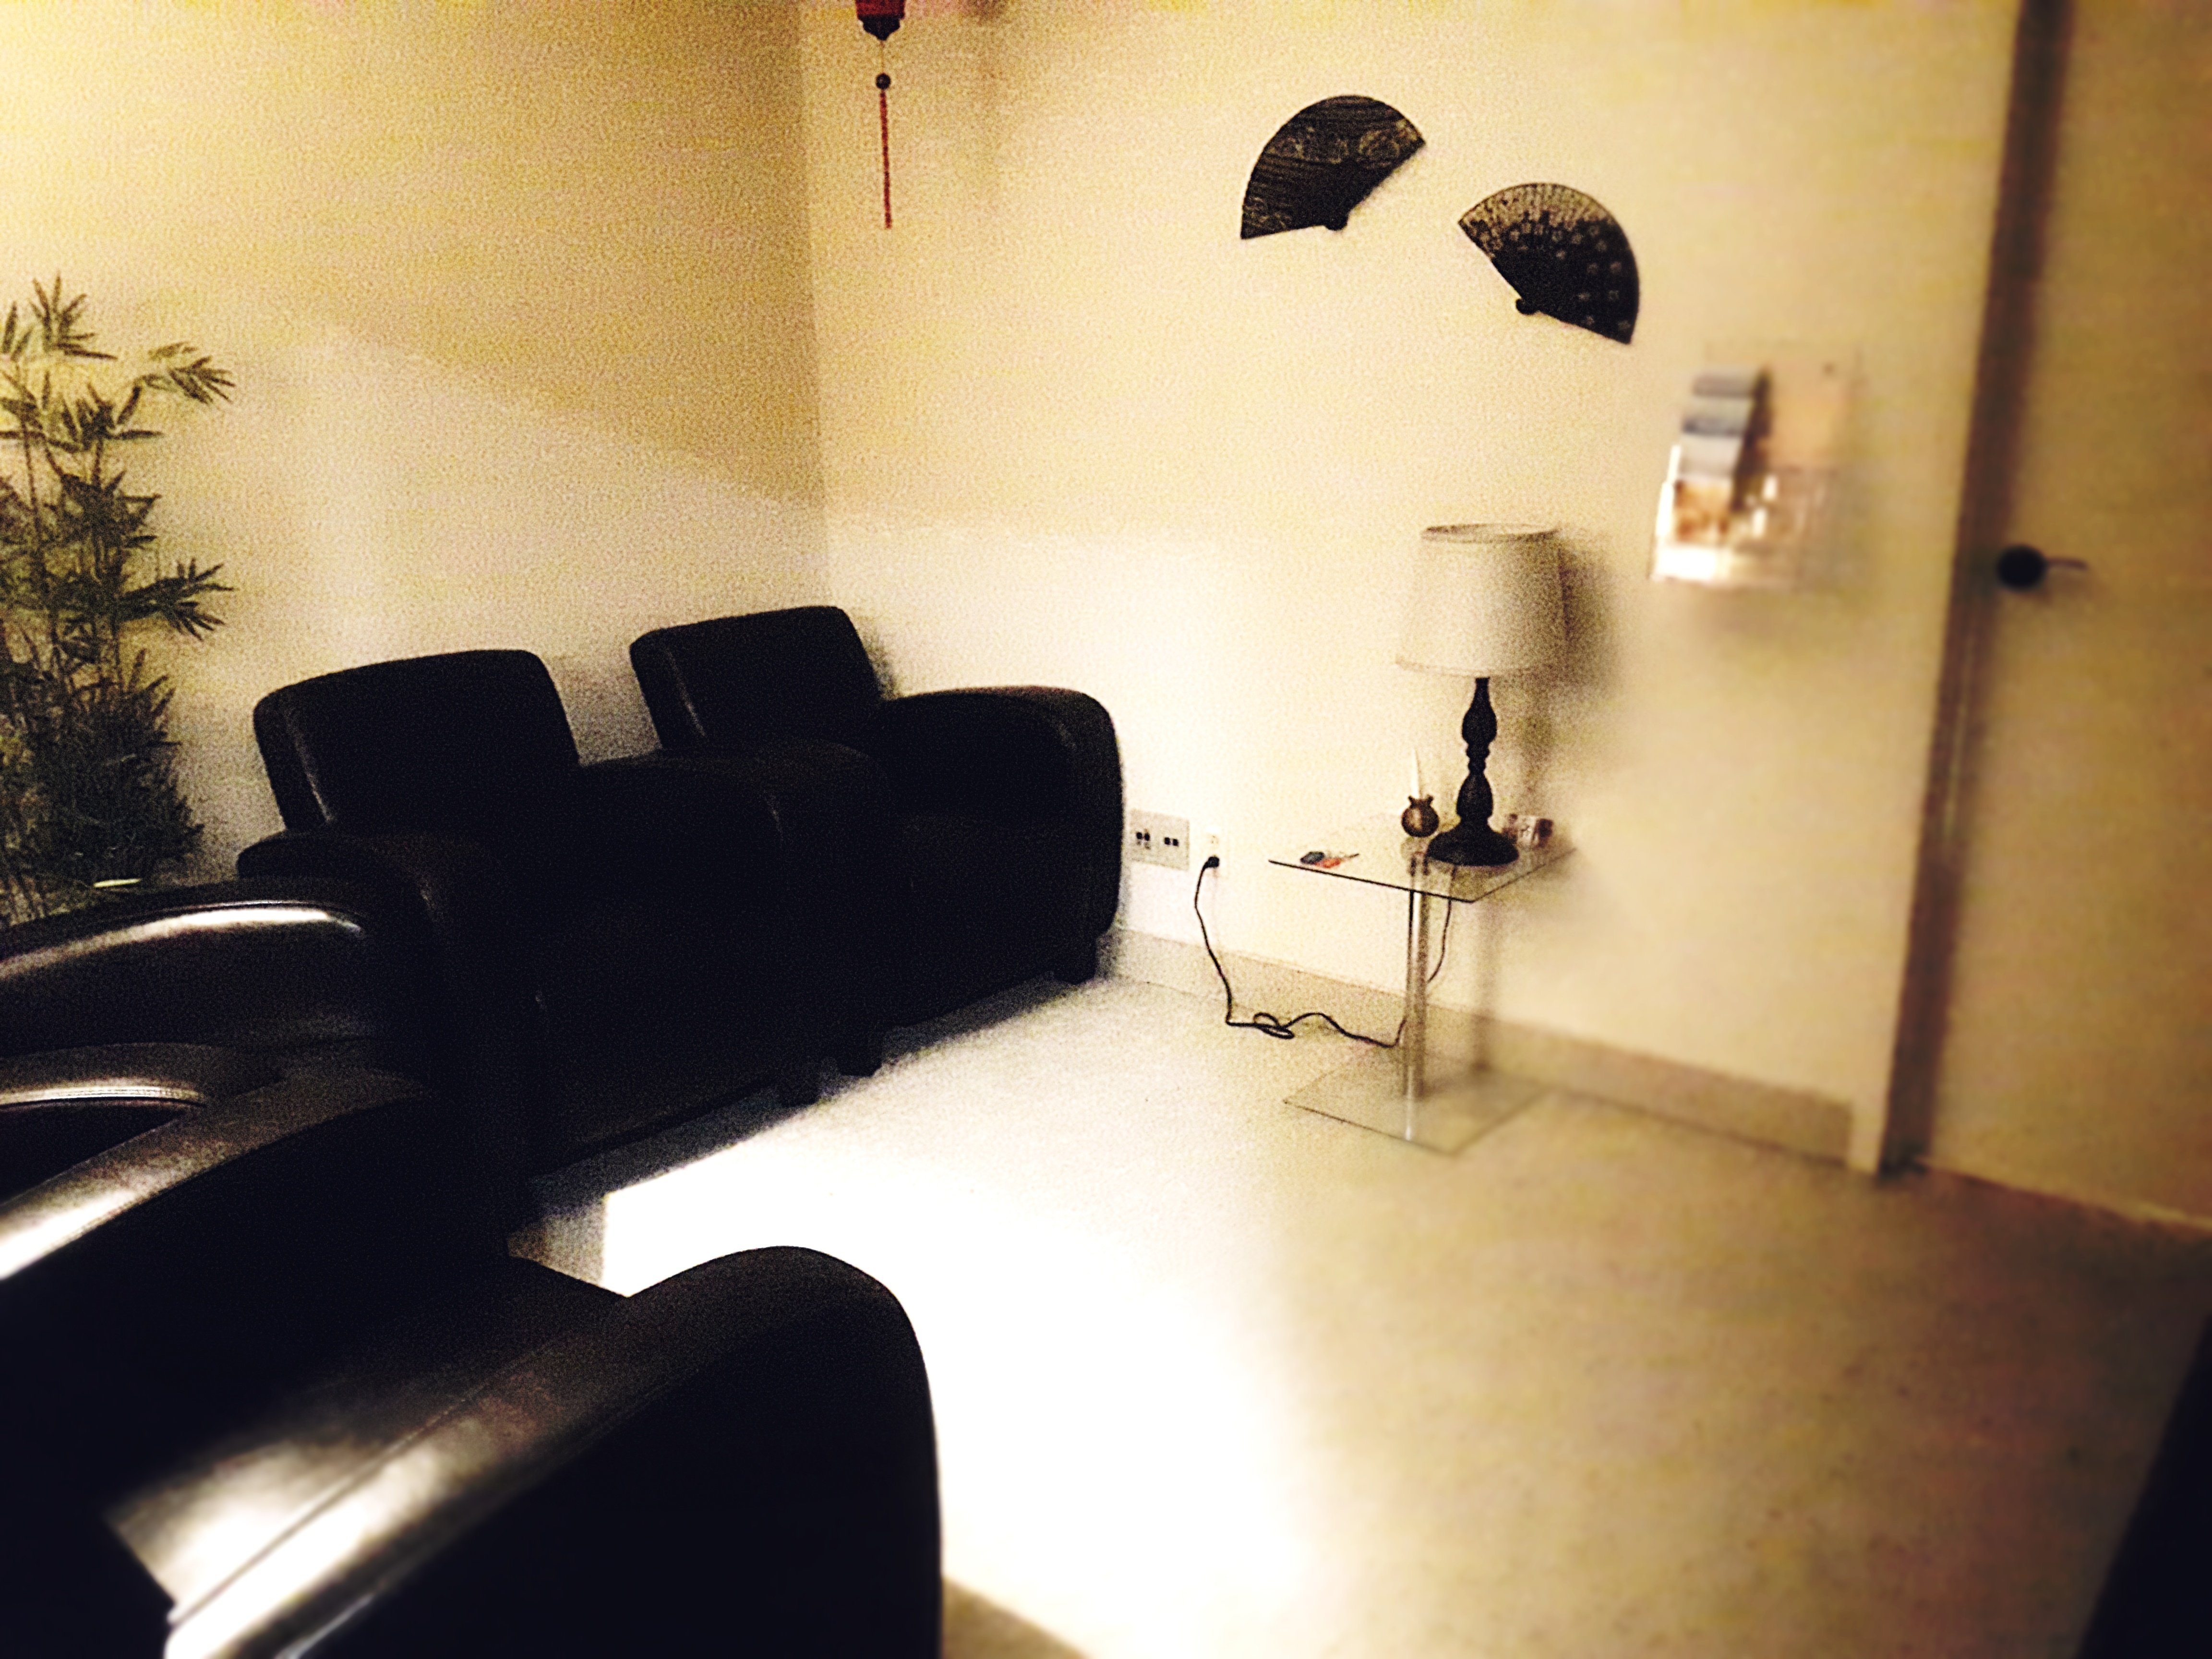 The waiting room is comfortable to receive you
Just rest and relax after your treatment
